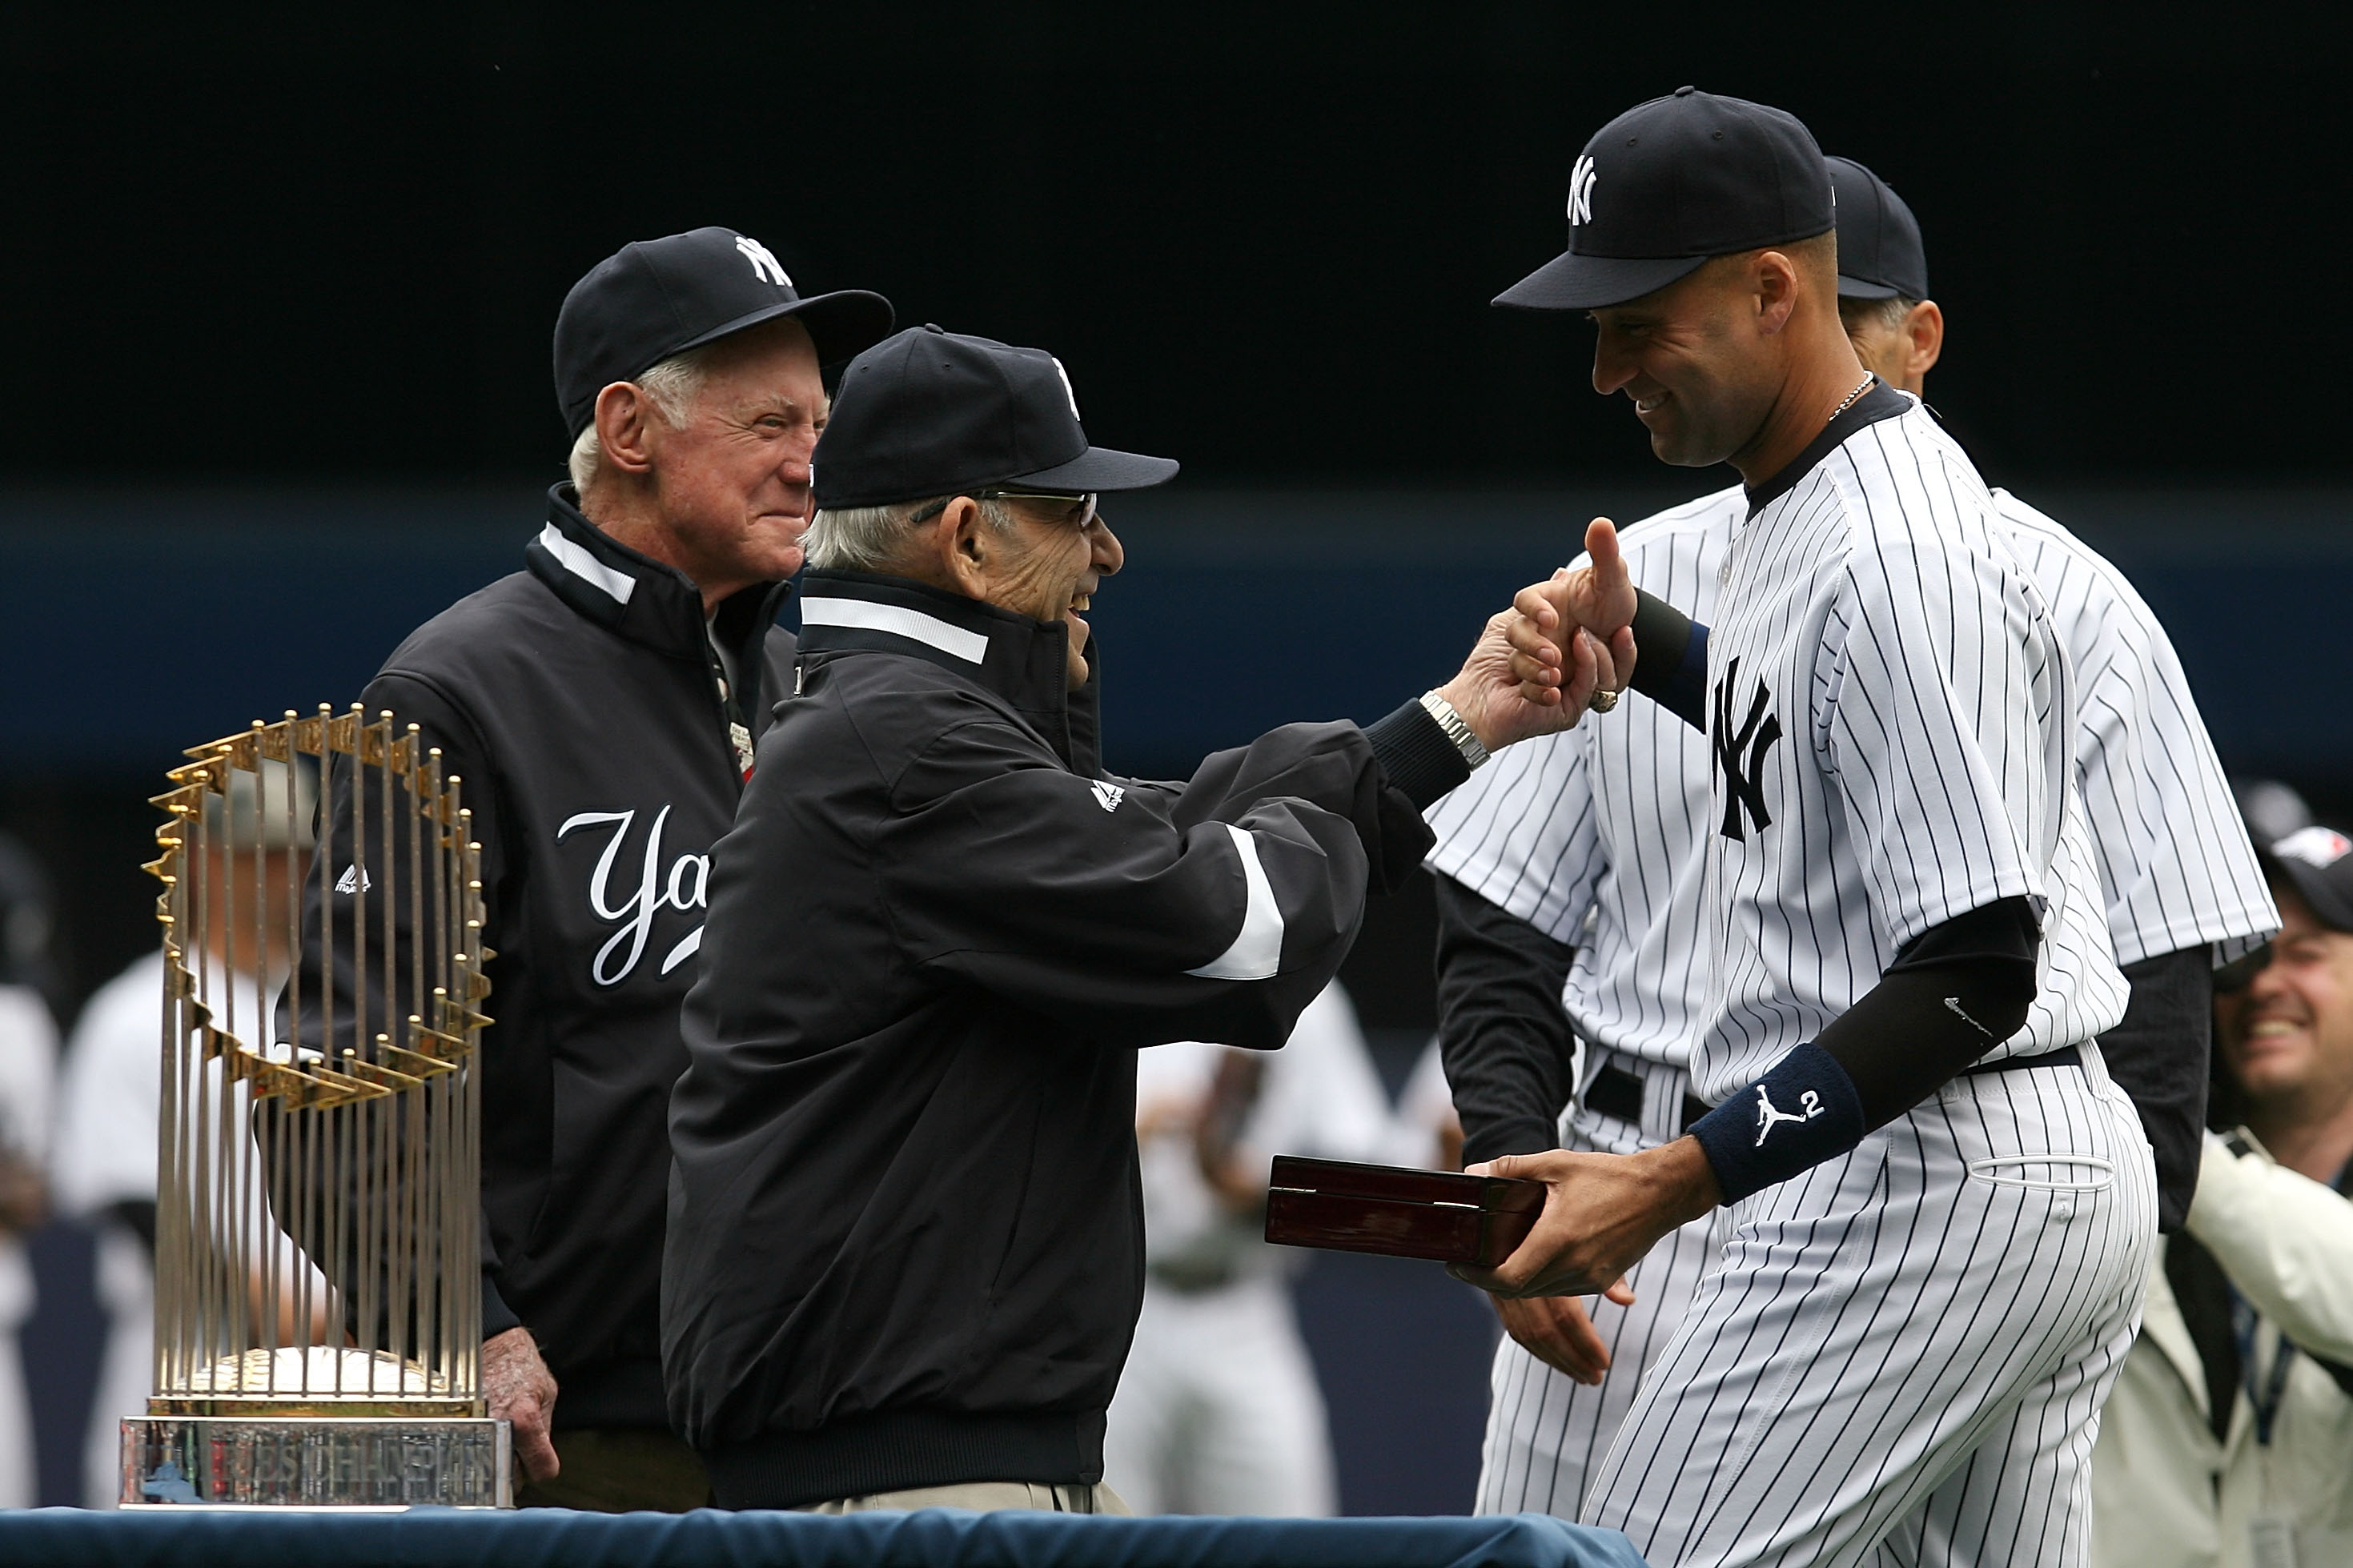 NEW YORK - APRIL 13:  Yankee legend and Baseball Hall of Famer Yogi Berra presents Derek Jeter #2 of the New York Yankees with his World Series ring for the 2009 season prior to playing against the Los Angeles Angels of Anaheim during the Yankees home ope